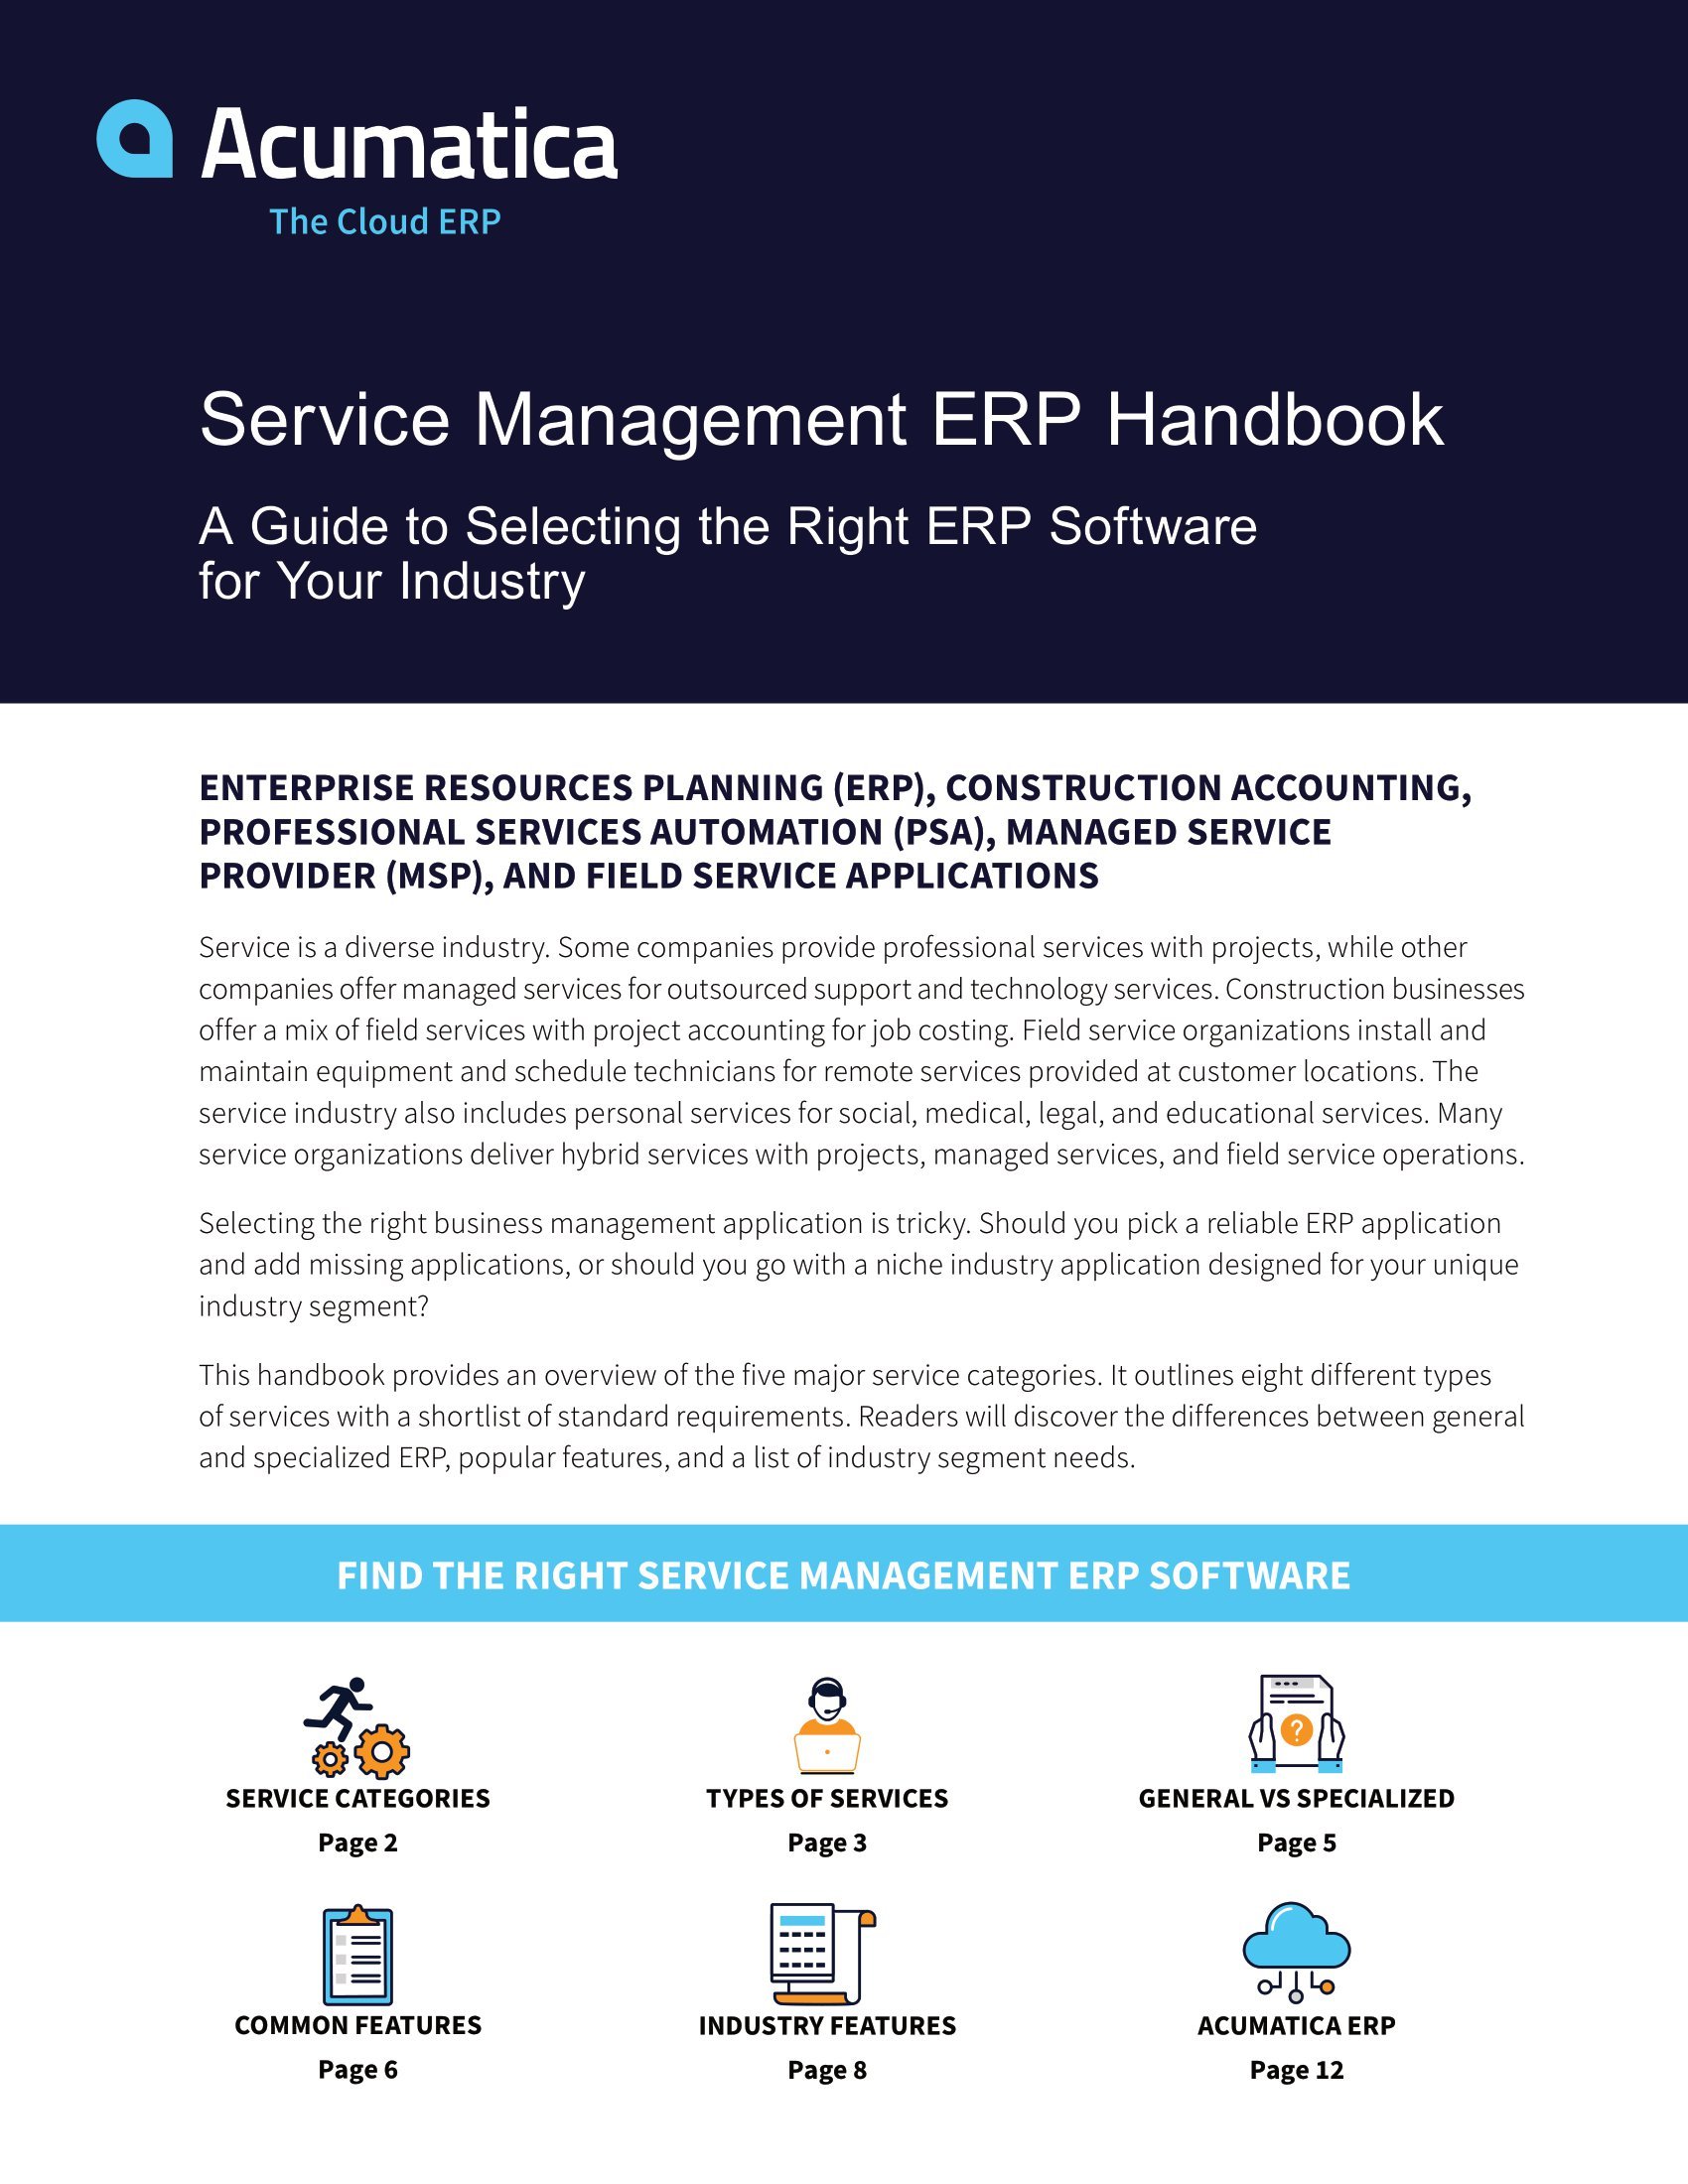 Drive Growth with Cloud Service Management Applications, page 0